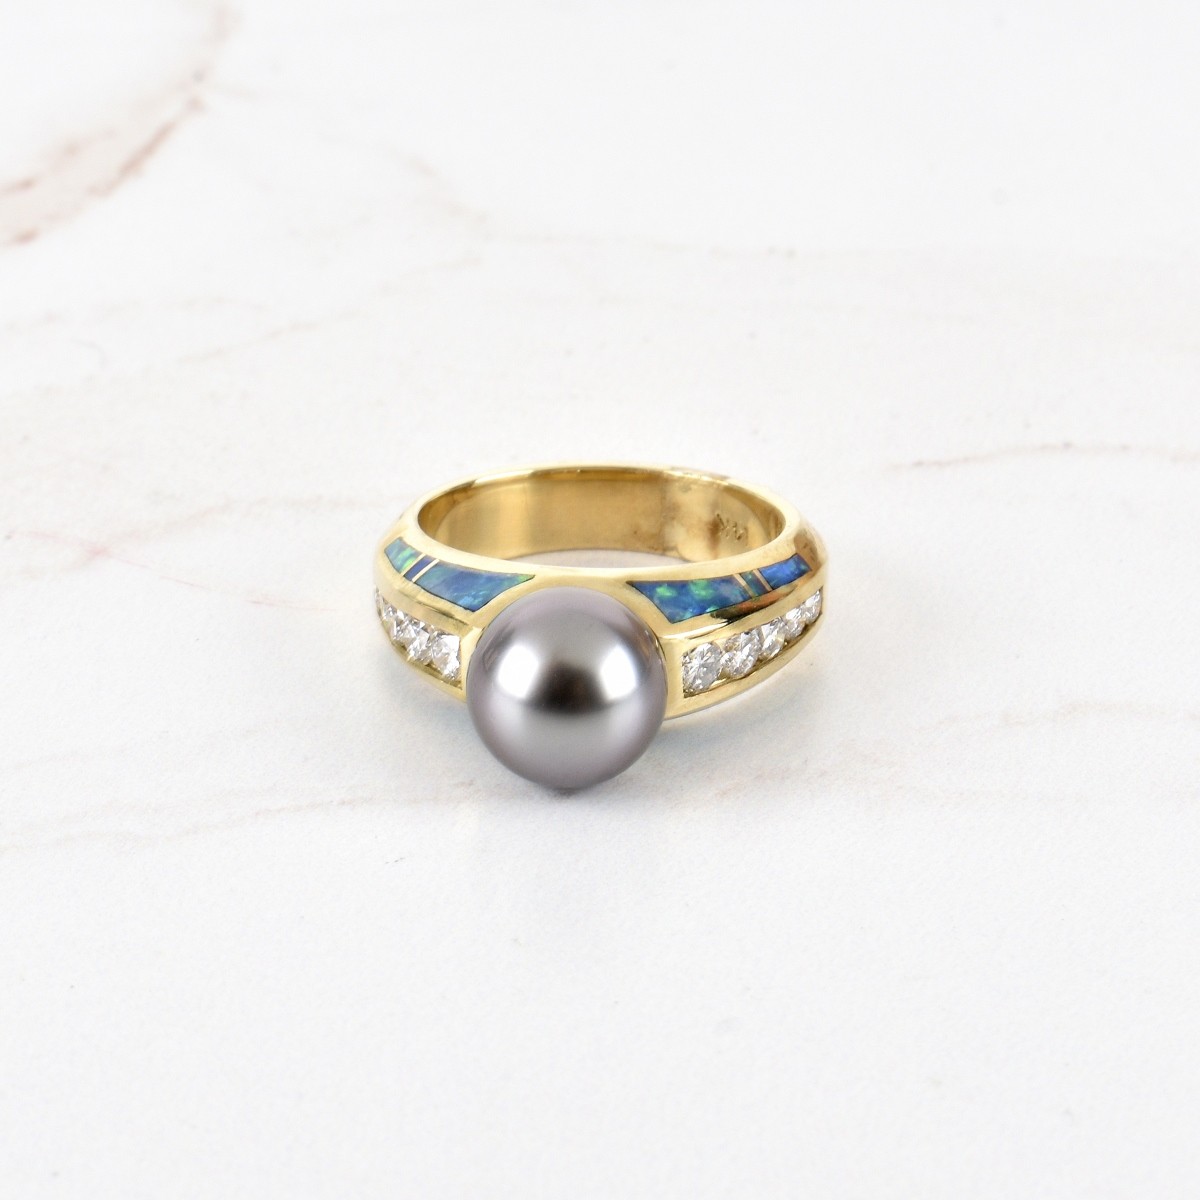 Diamond, Pearl, Opal and 14K Ring